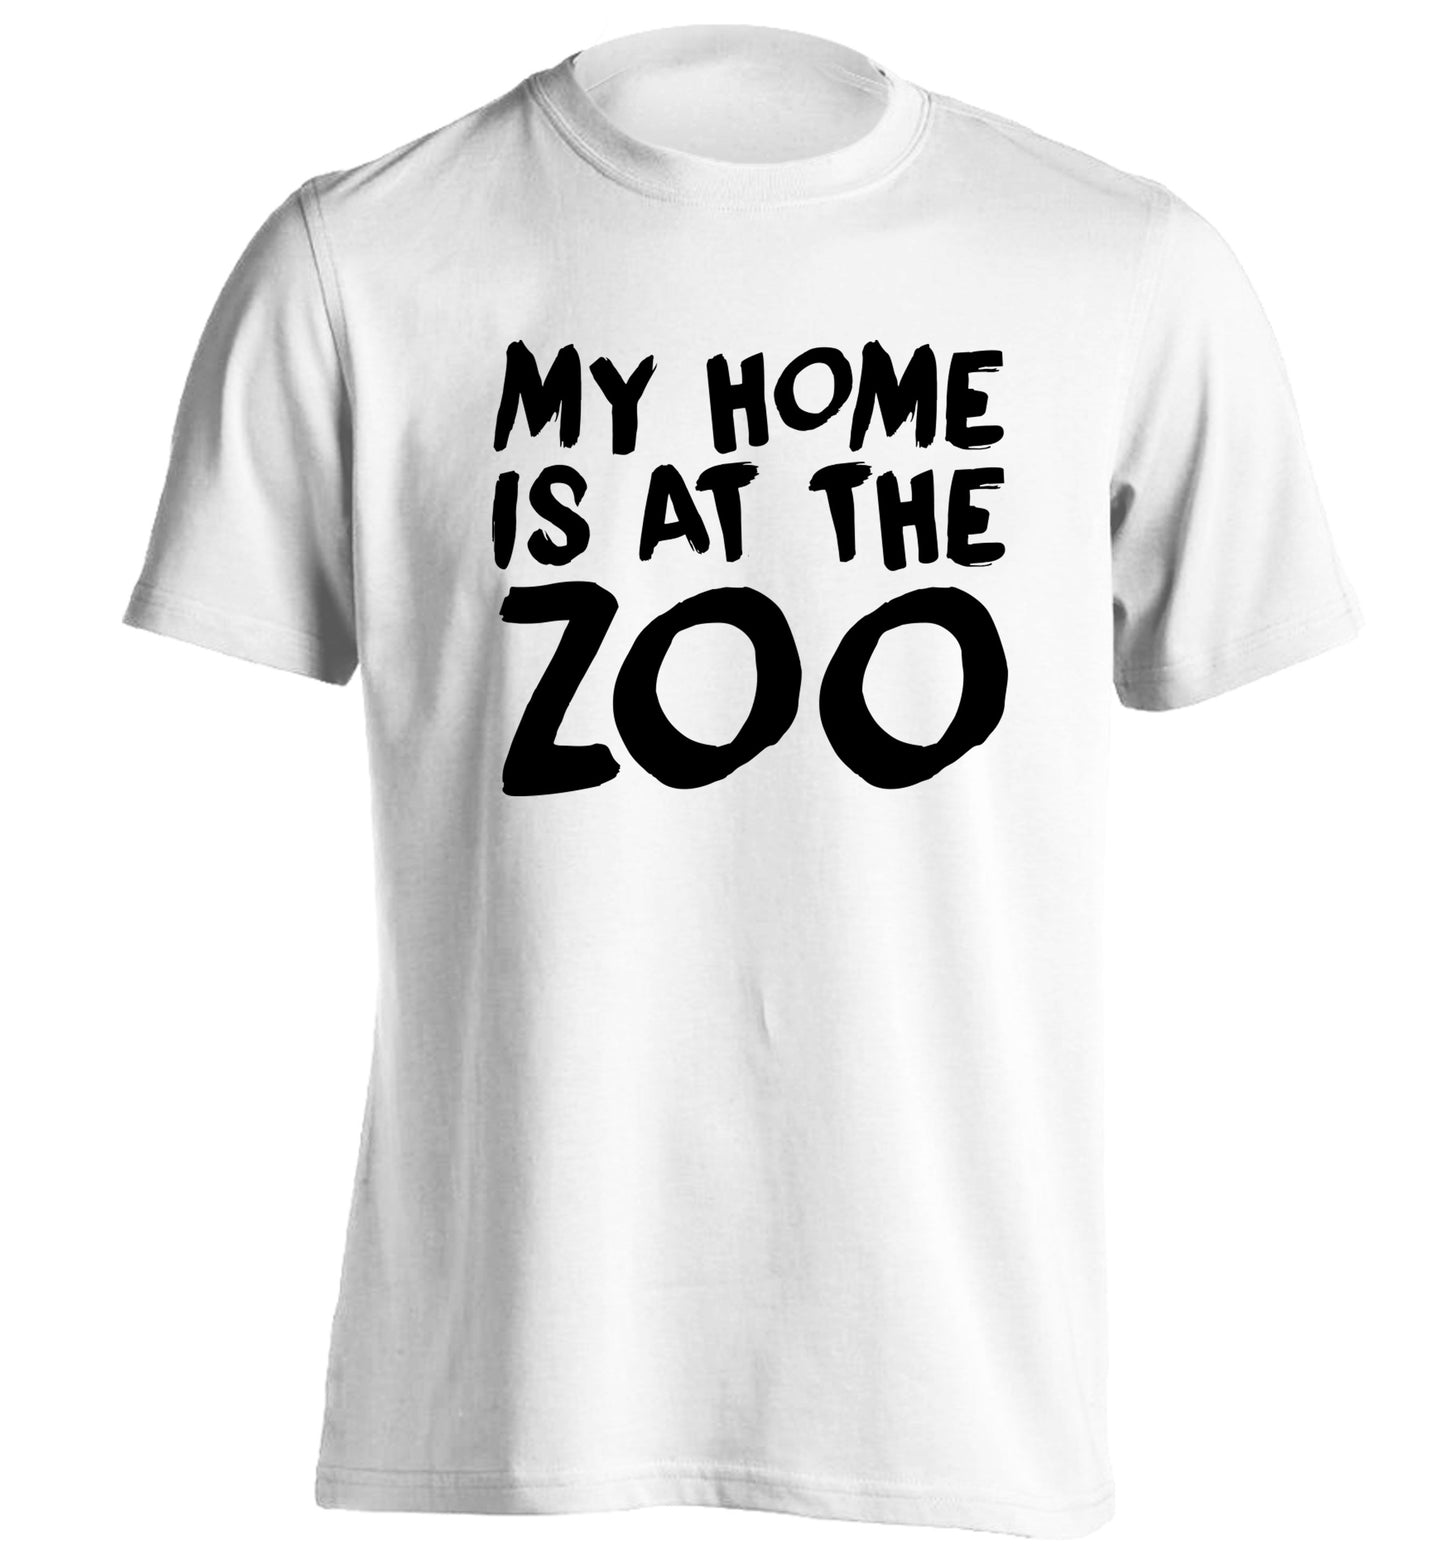 My home is at the zoo adults unisex white Tshirt 2XL